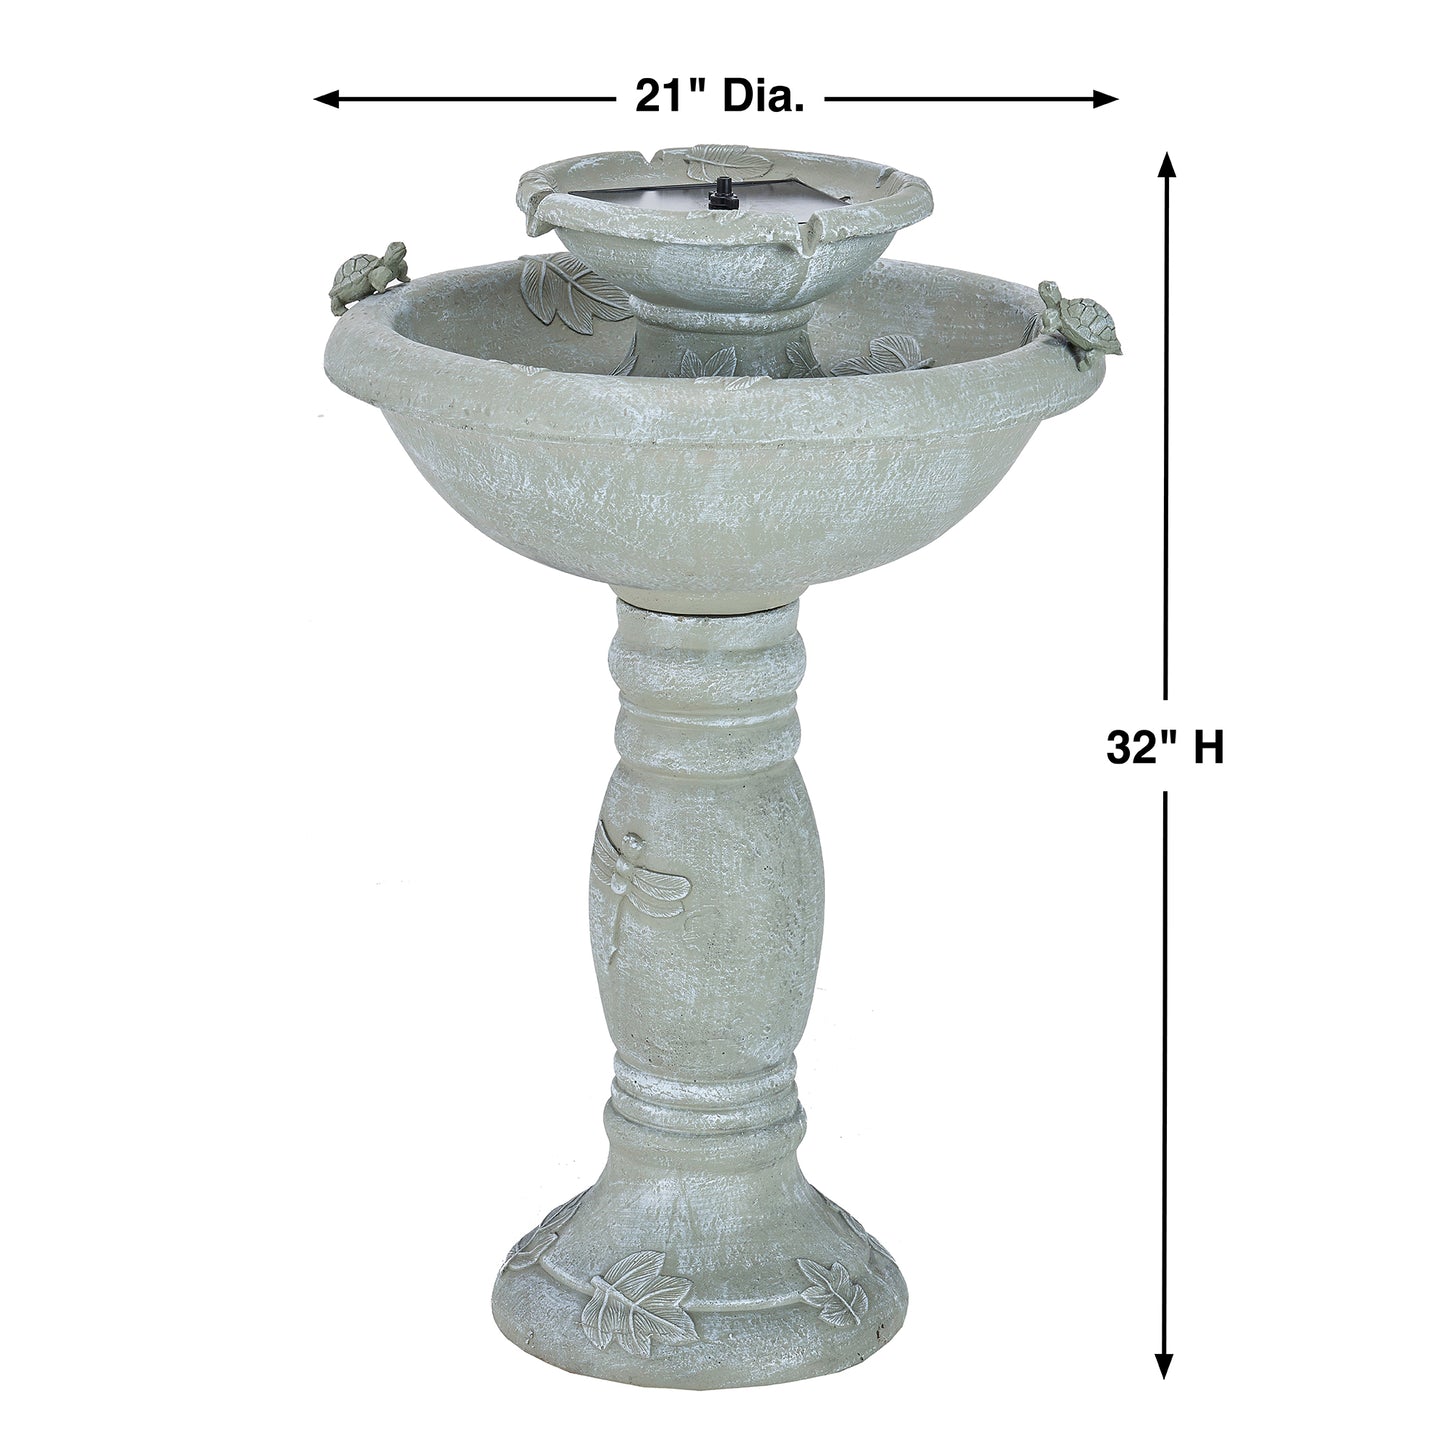 Country Gardens 2-Tier Solar-On-Demand Fountain - Weathered Stone